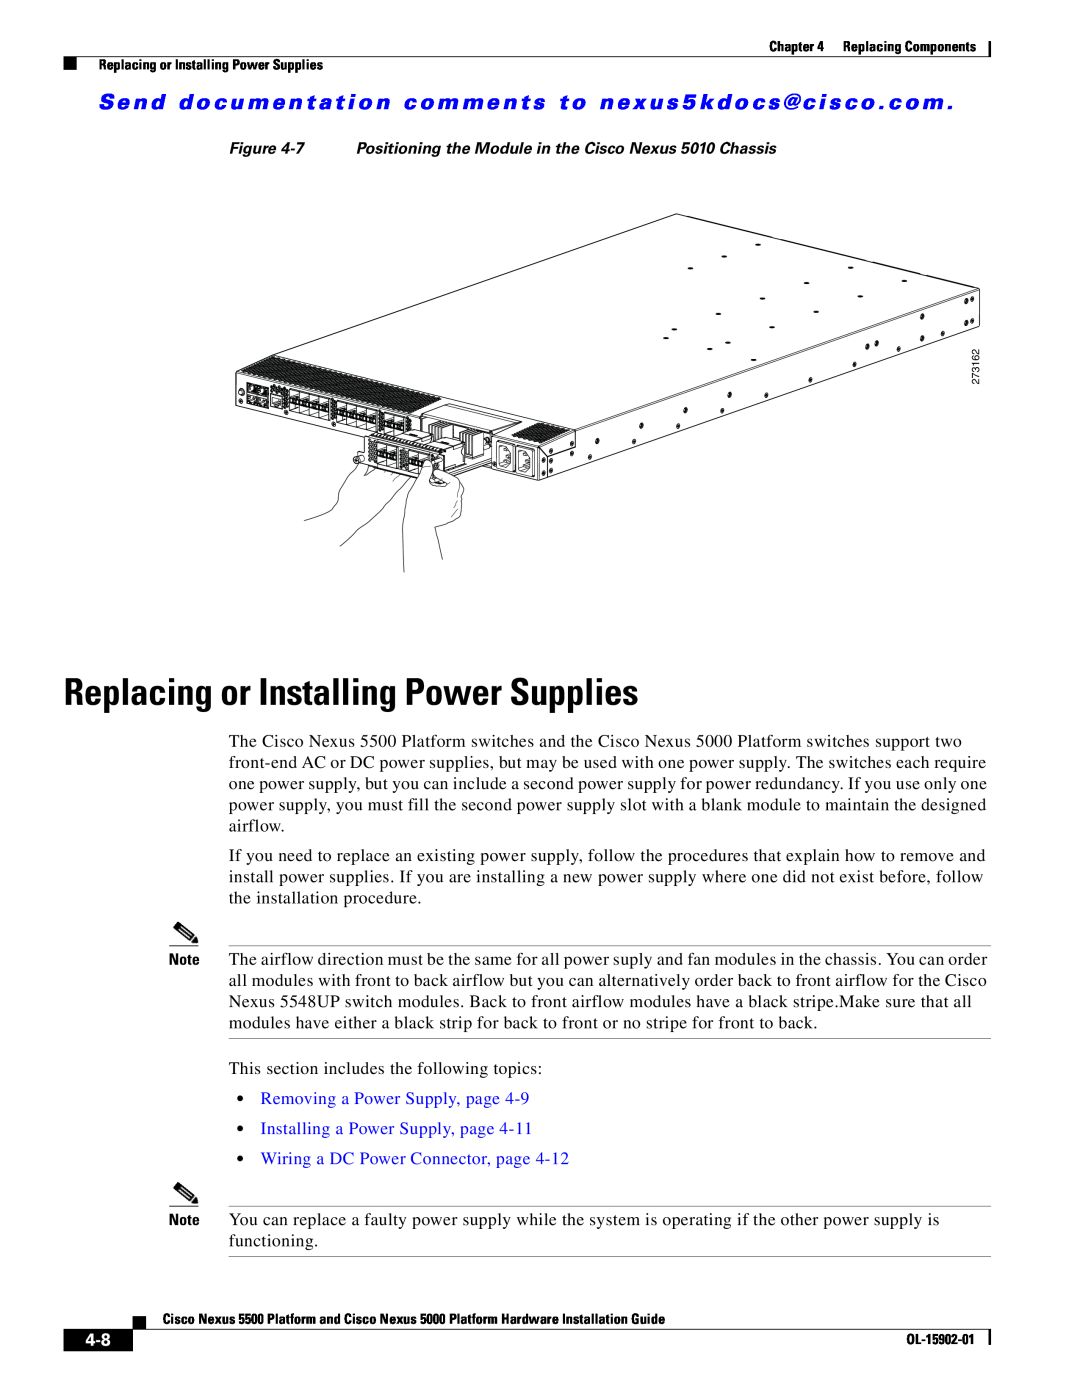 Cisco Systems 5000 Replacing or Installing Power Supplies, Removing a Power Supply, page Installing a Power Supply, page 